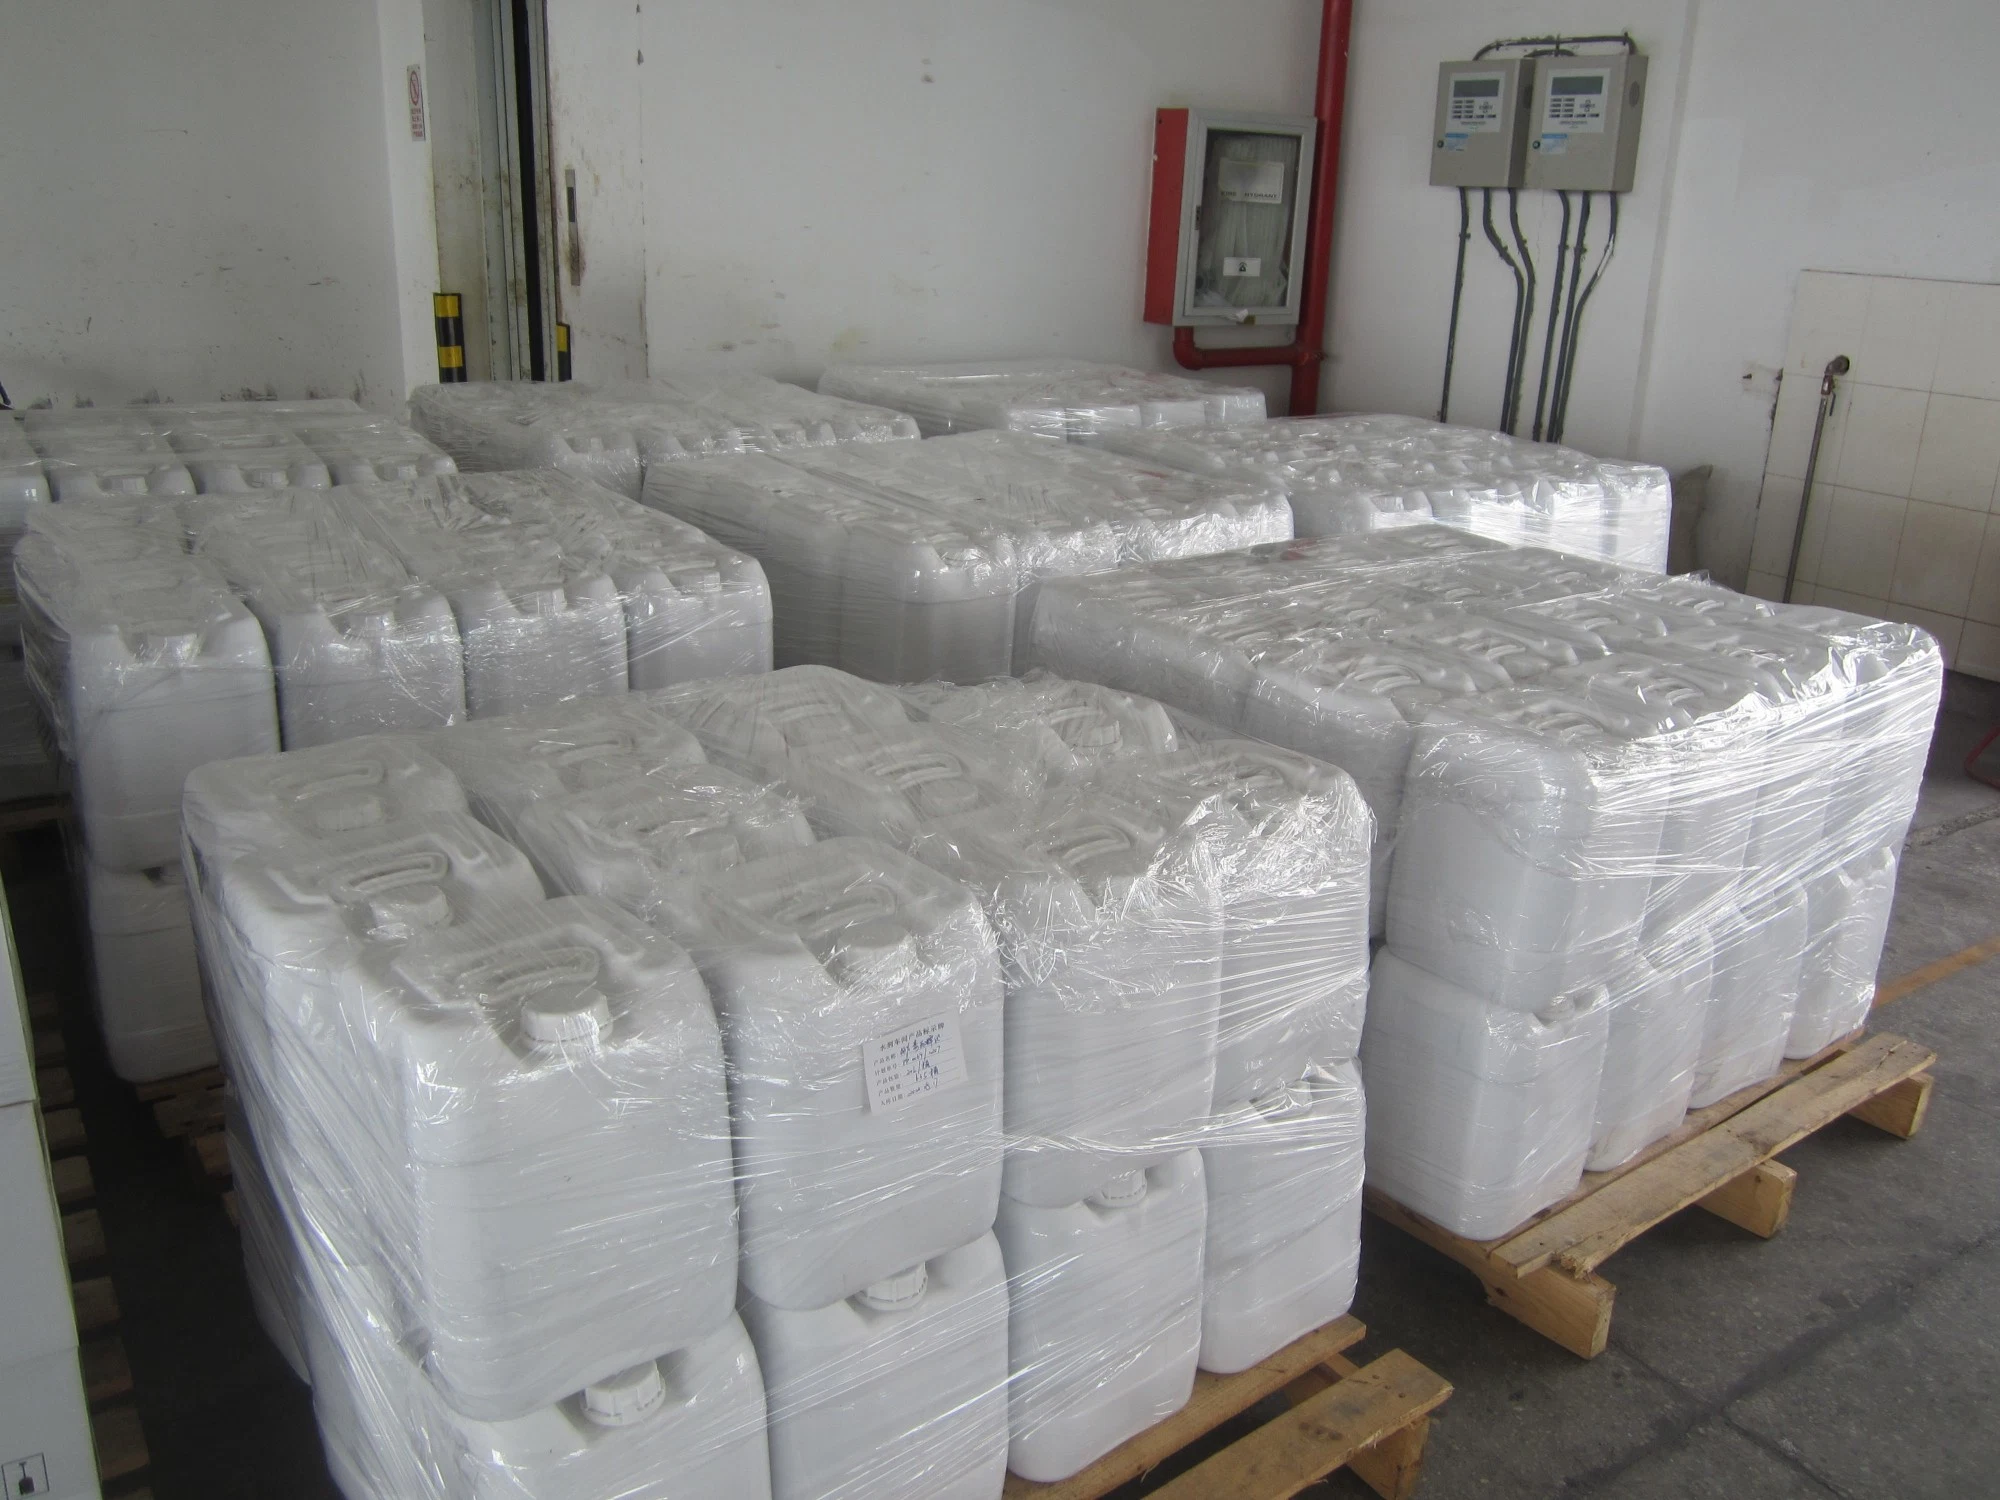 Agrochemical Pesticide Imidacloprid 20%+Thiram 6%+Carboxin 6% Fs